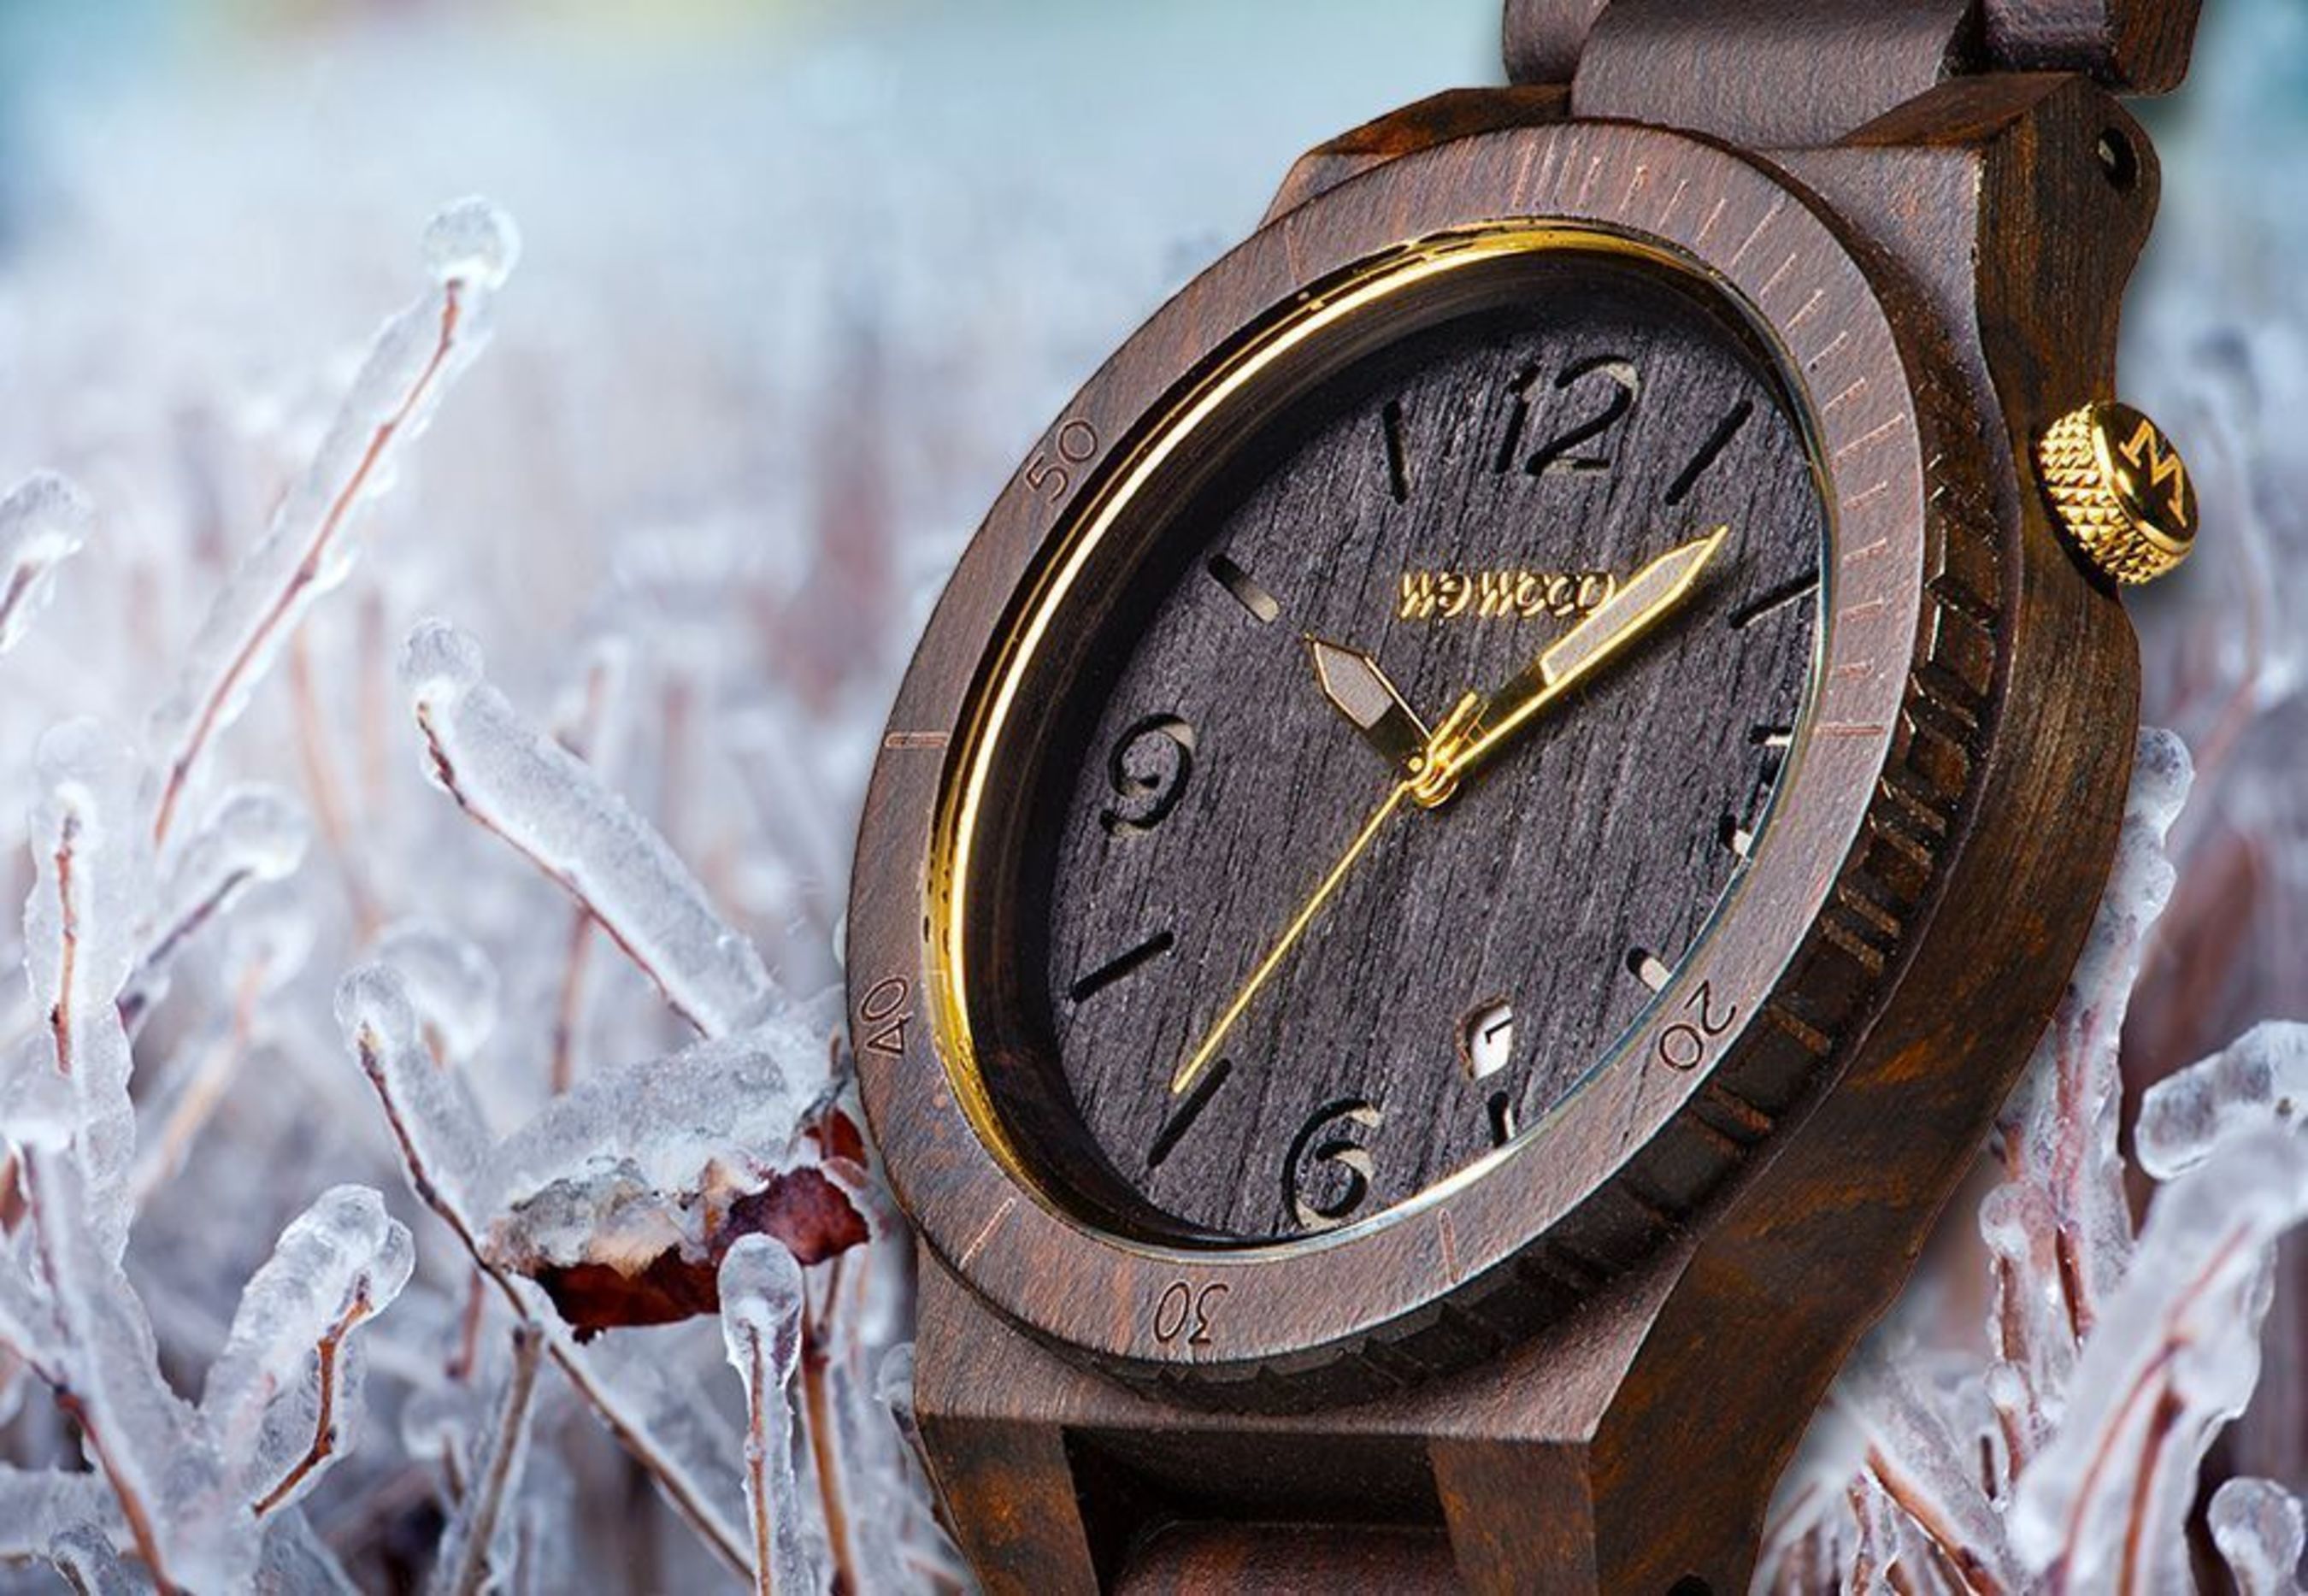 The Alpha Black Gold is the newest addition to WeWOOD's line of eco-friendly accessories. Beautiful African Blackwood is accented by a festive gold crown and hands. Sales from this new watch will help WeWOOD reach its goal of planting 1 million trees by 2020. (PRNewsFoto/WeWOOD)